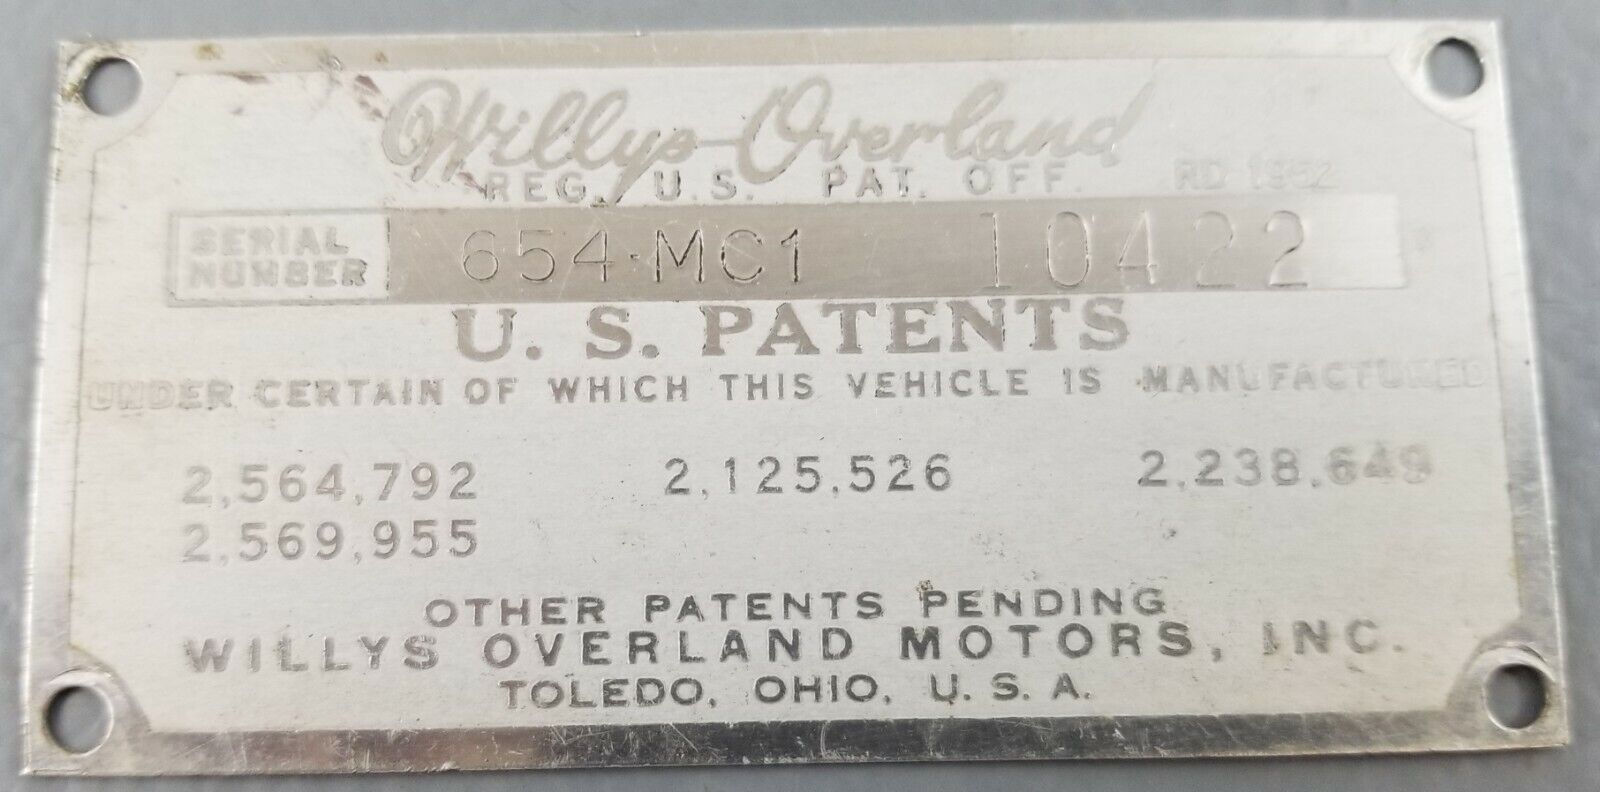 1954 WILLYS OVERLAND EAGLE DELUXE BODY DATA PLATE TAG Original Ser# 654MC1 10422